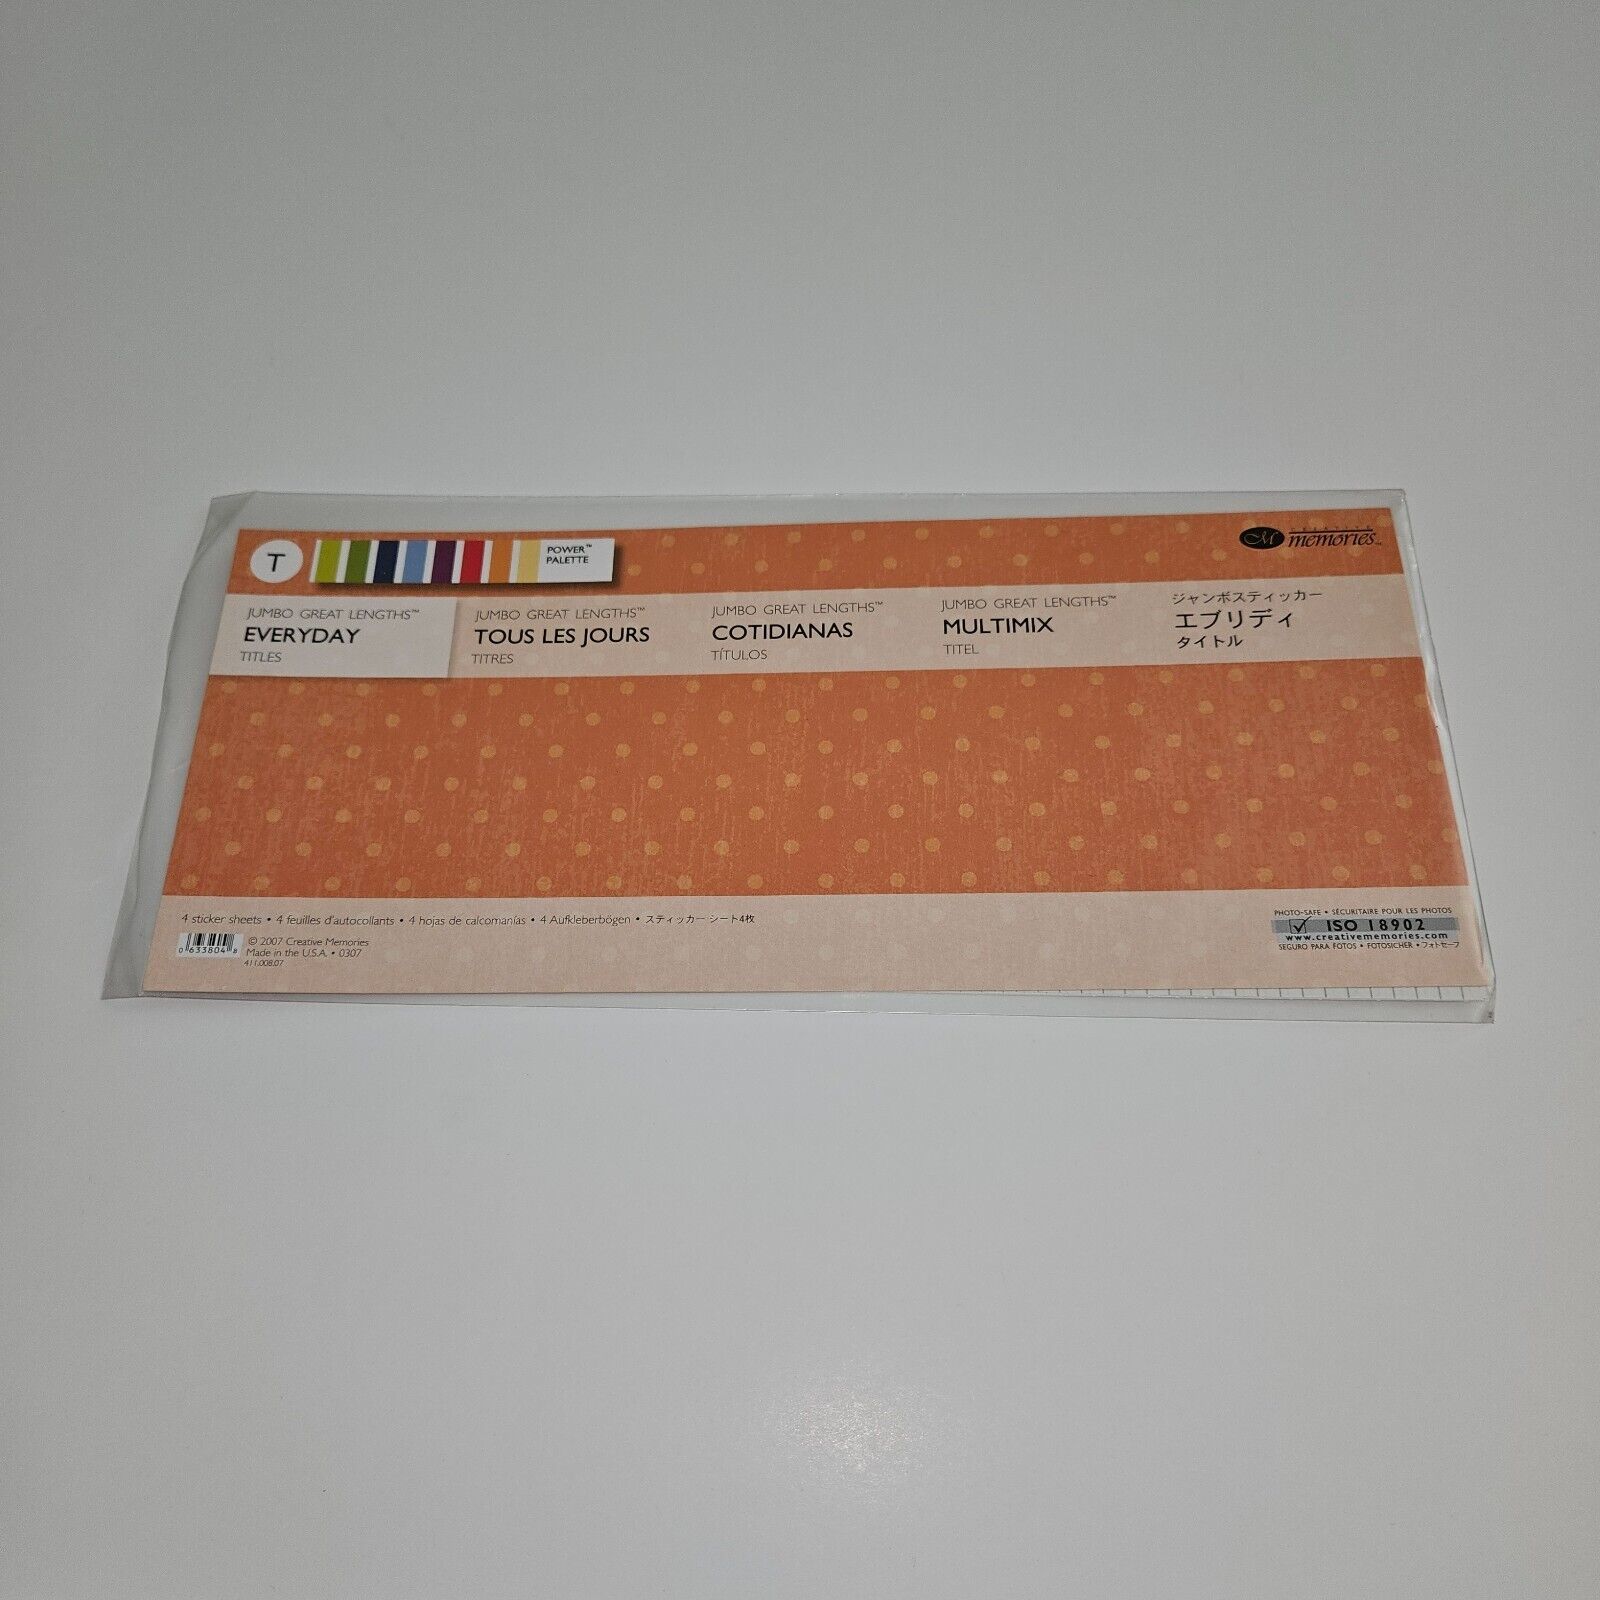 Creative Memories Jumbo Great Lengths Everyday Titles 4 Sticker Sheet NEVER USED - $9.85